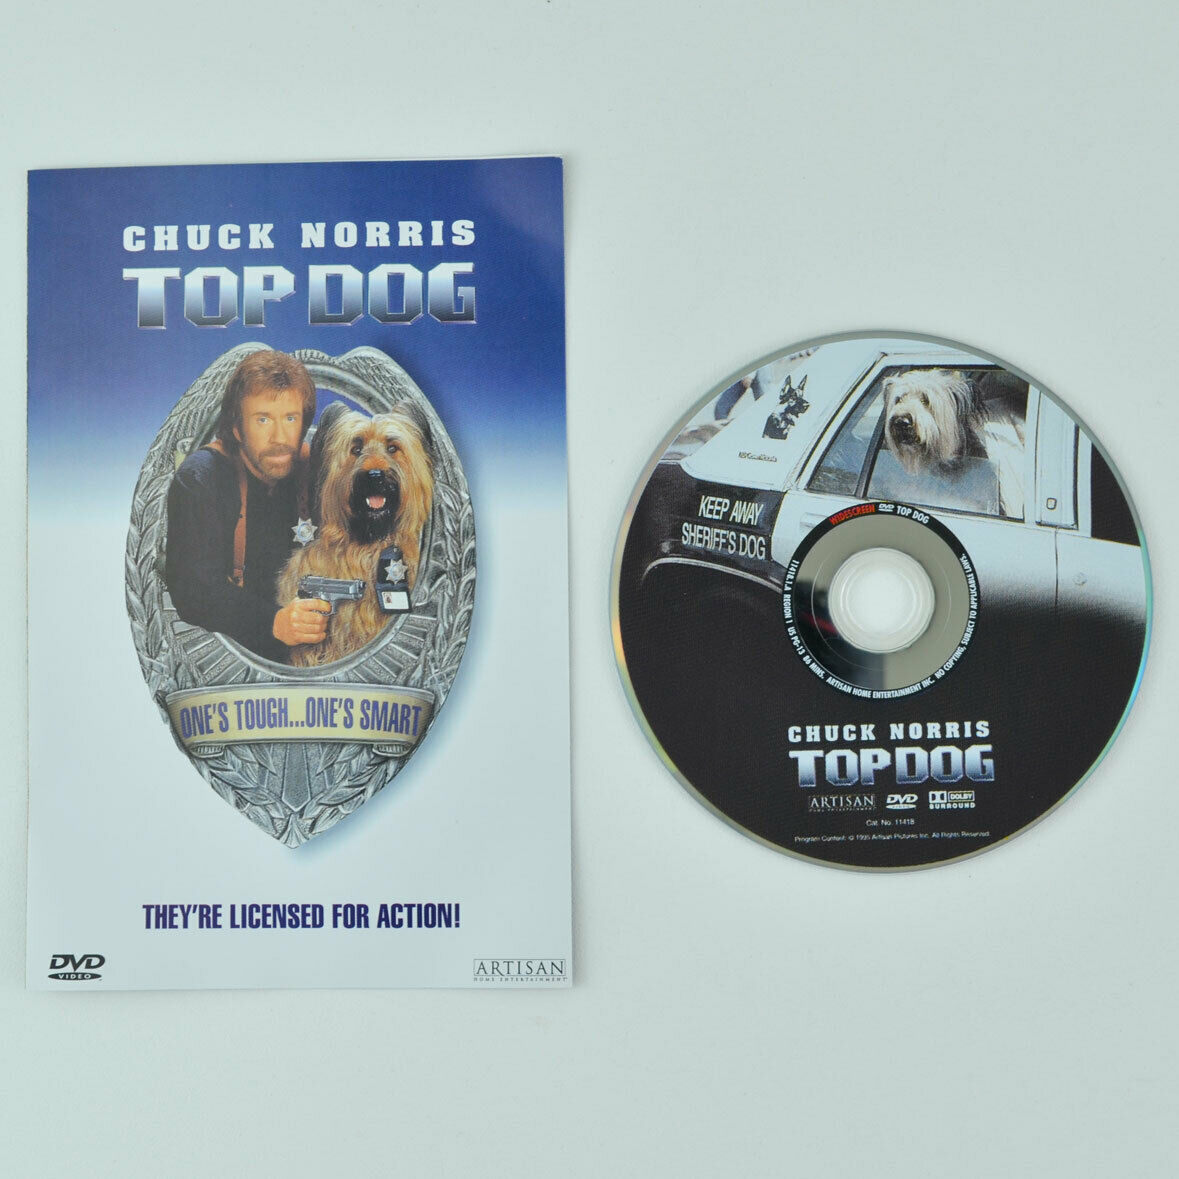 Top Dog (DVD, 1999) Chuck Norris - Slipcover and DISC ONLY